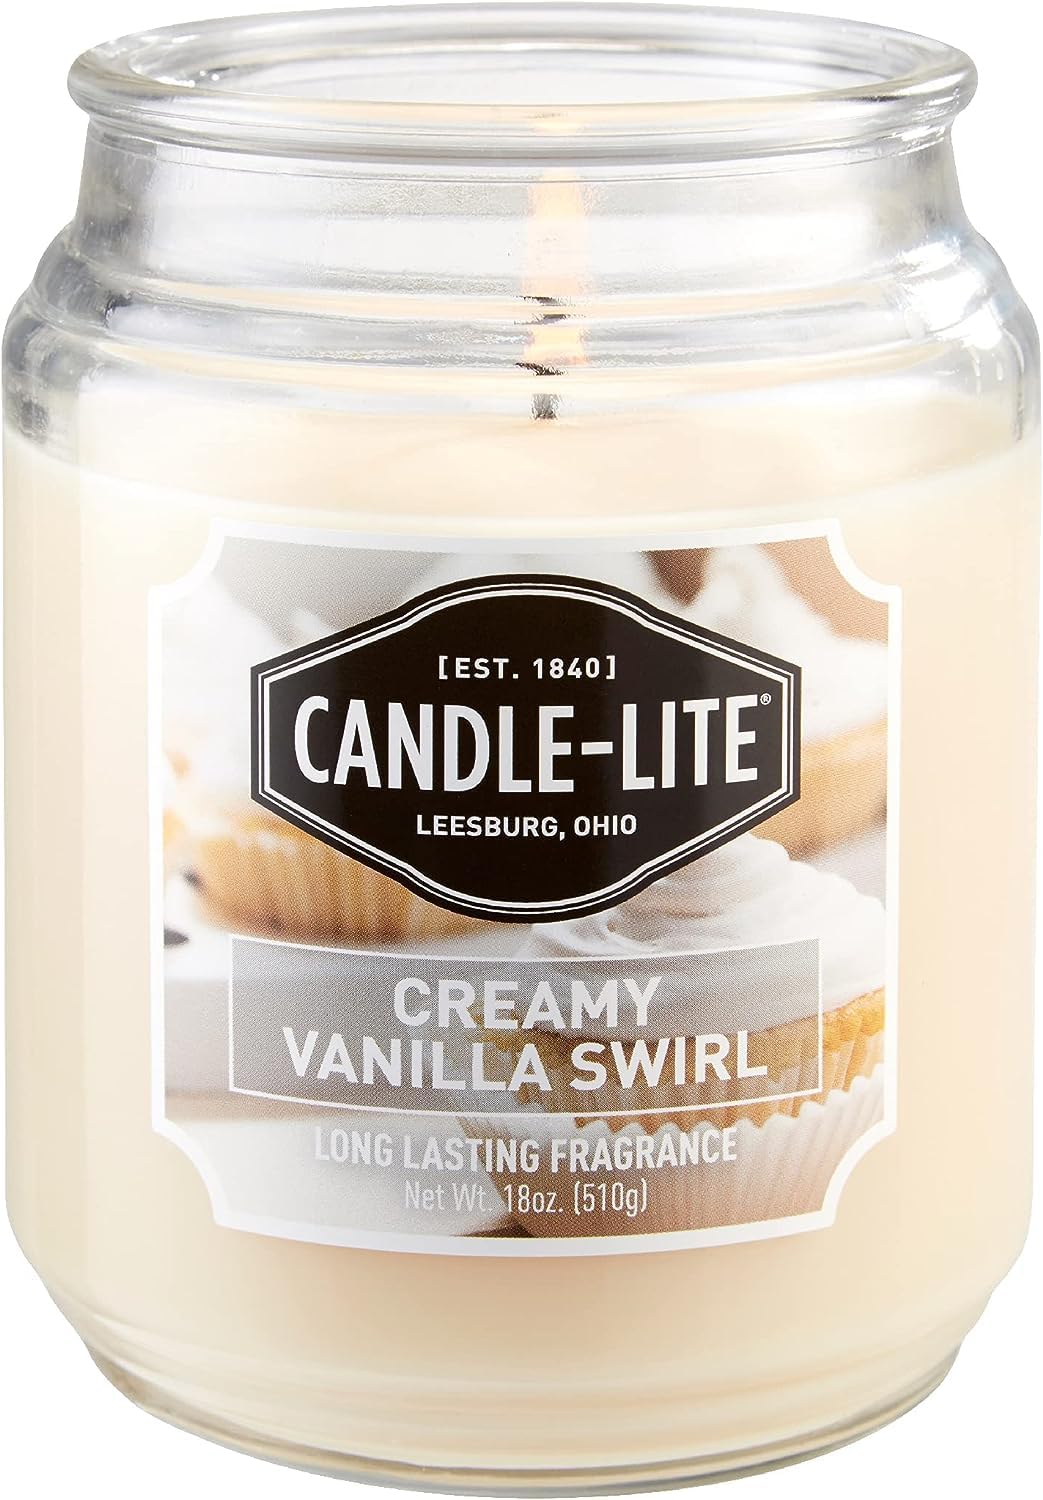 Candle-lite Scented Candles, Creamy Vanilla Swirl Fragrance, One 18 oz. Single-Wick Aromatherapy Candle with 110 Hours of Burn Time, Off-White Color